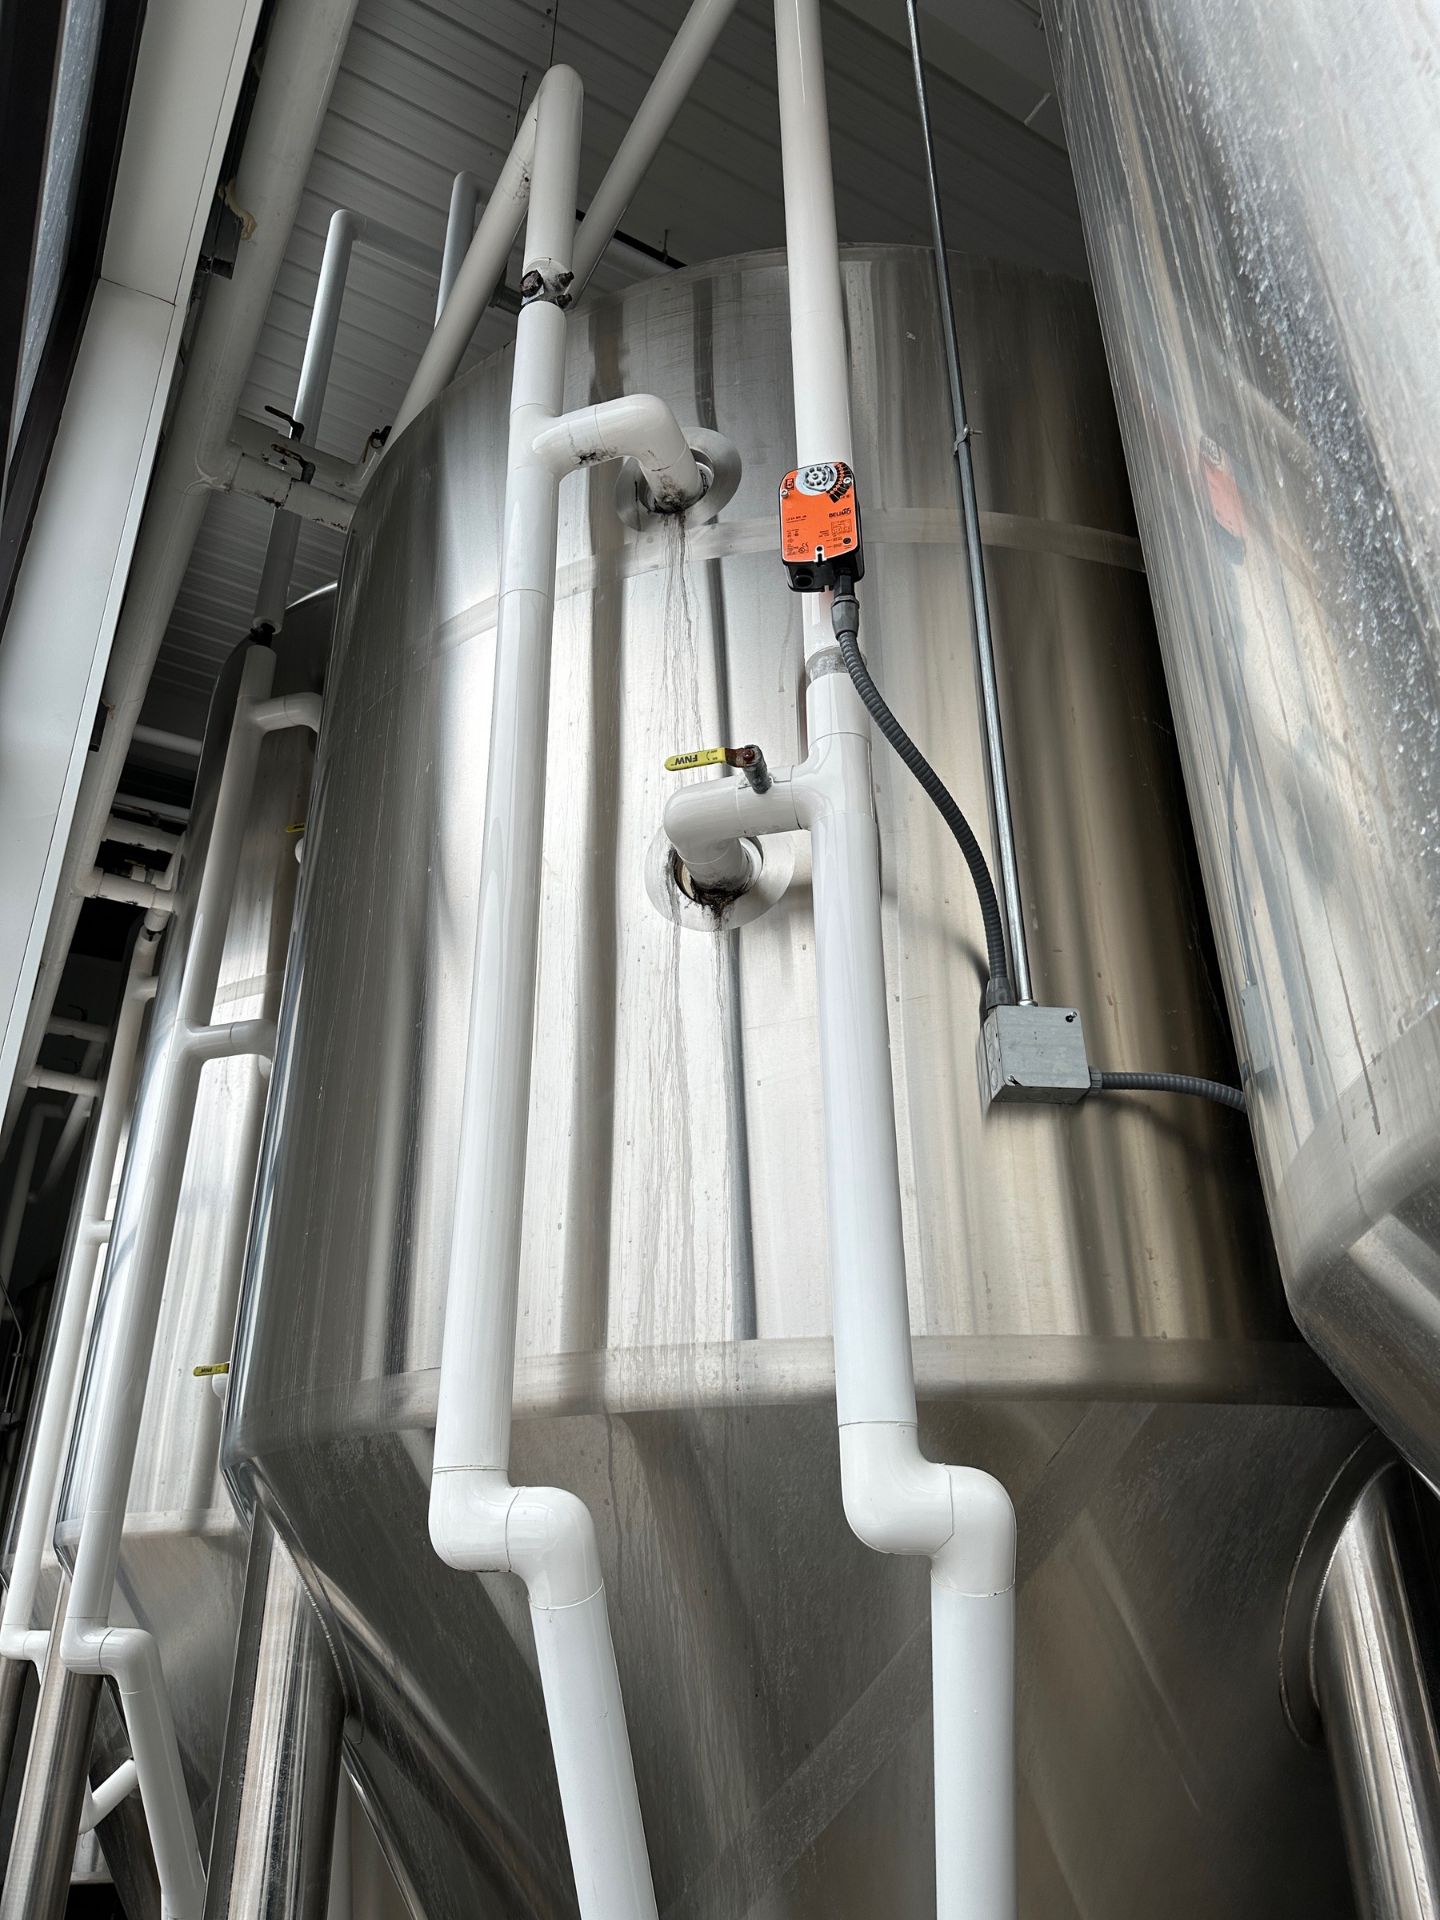 DME 60 BBL Stainless Steel Fermentation Tank - Cone Bottom, Glycol Jacketed, Mandoor, Zwickel Valve, - Image 3 of 4